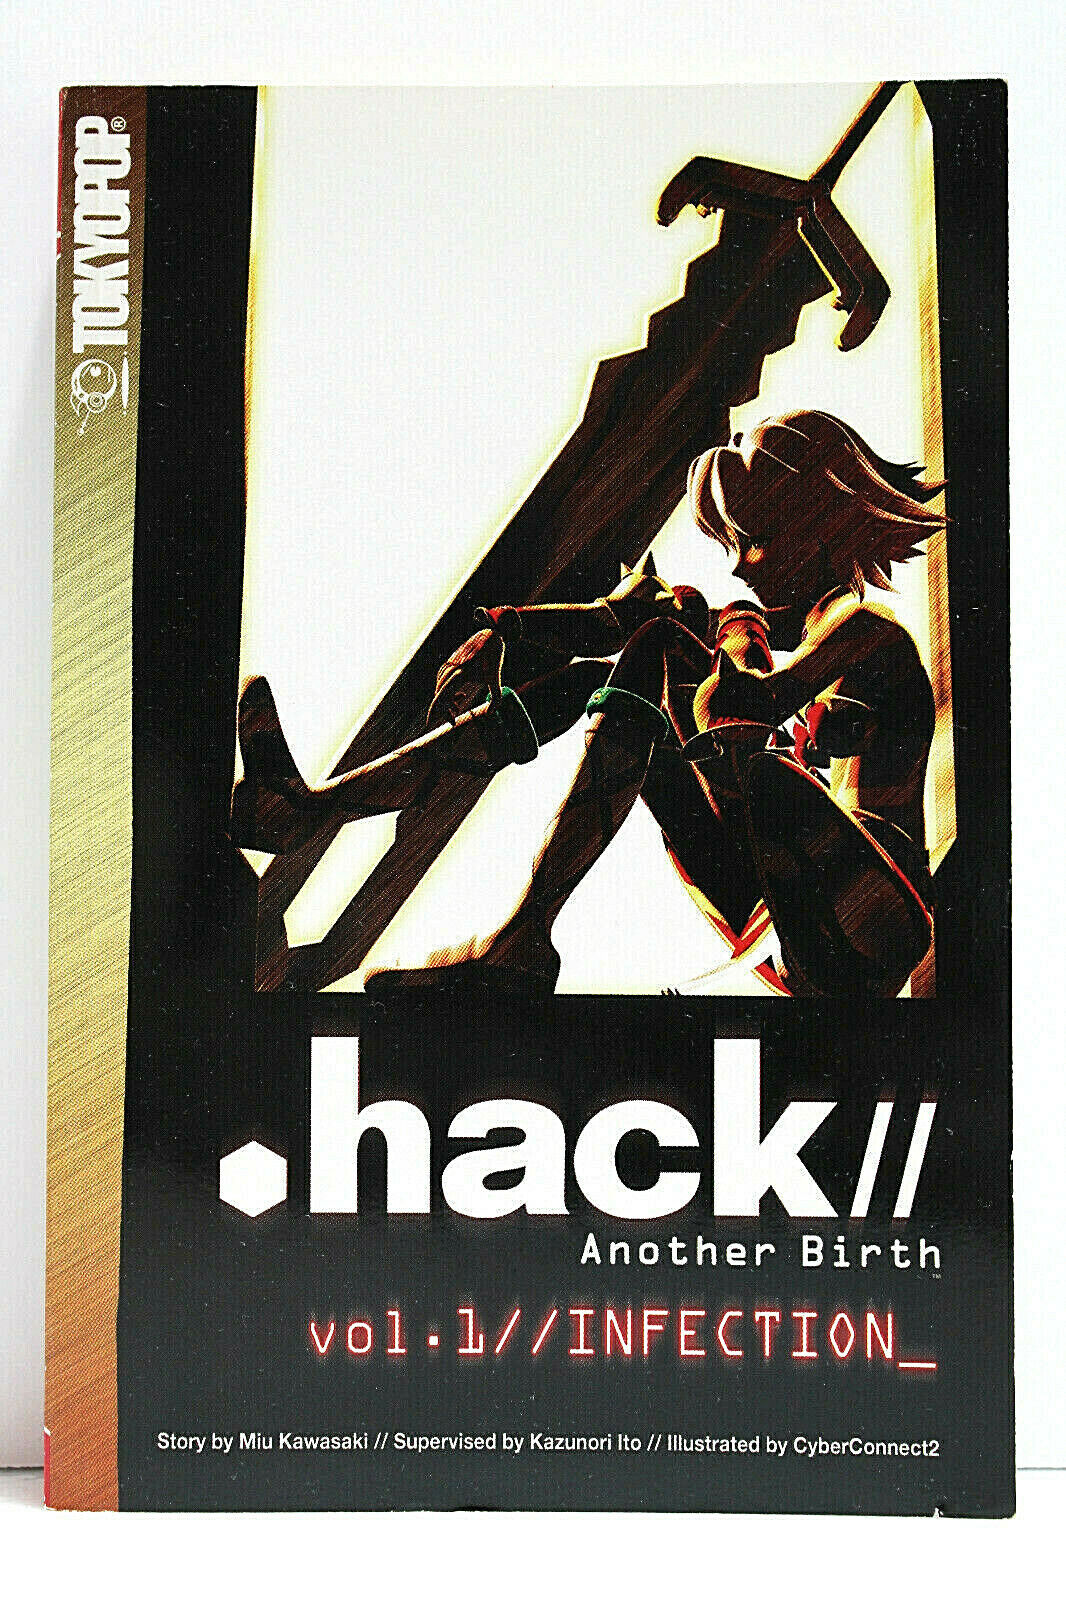 .Hack// Another Birth Vol.1 Infection (paperback, 2006)